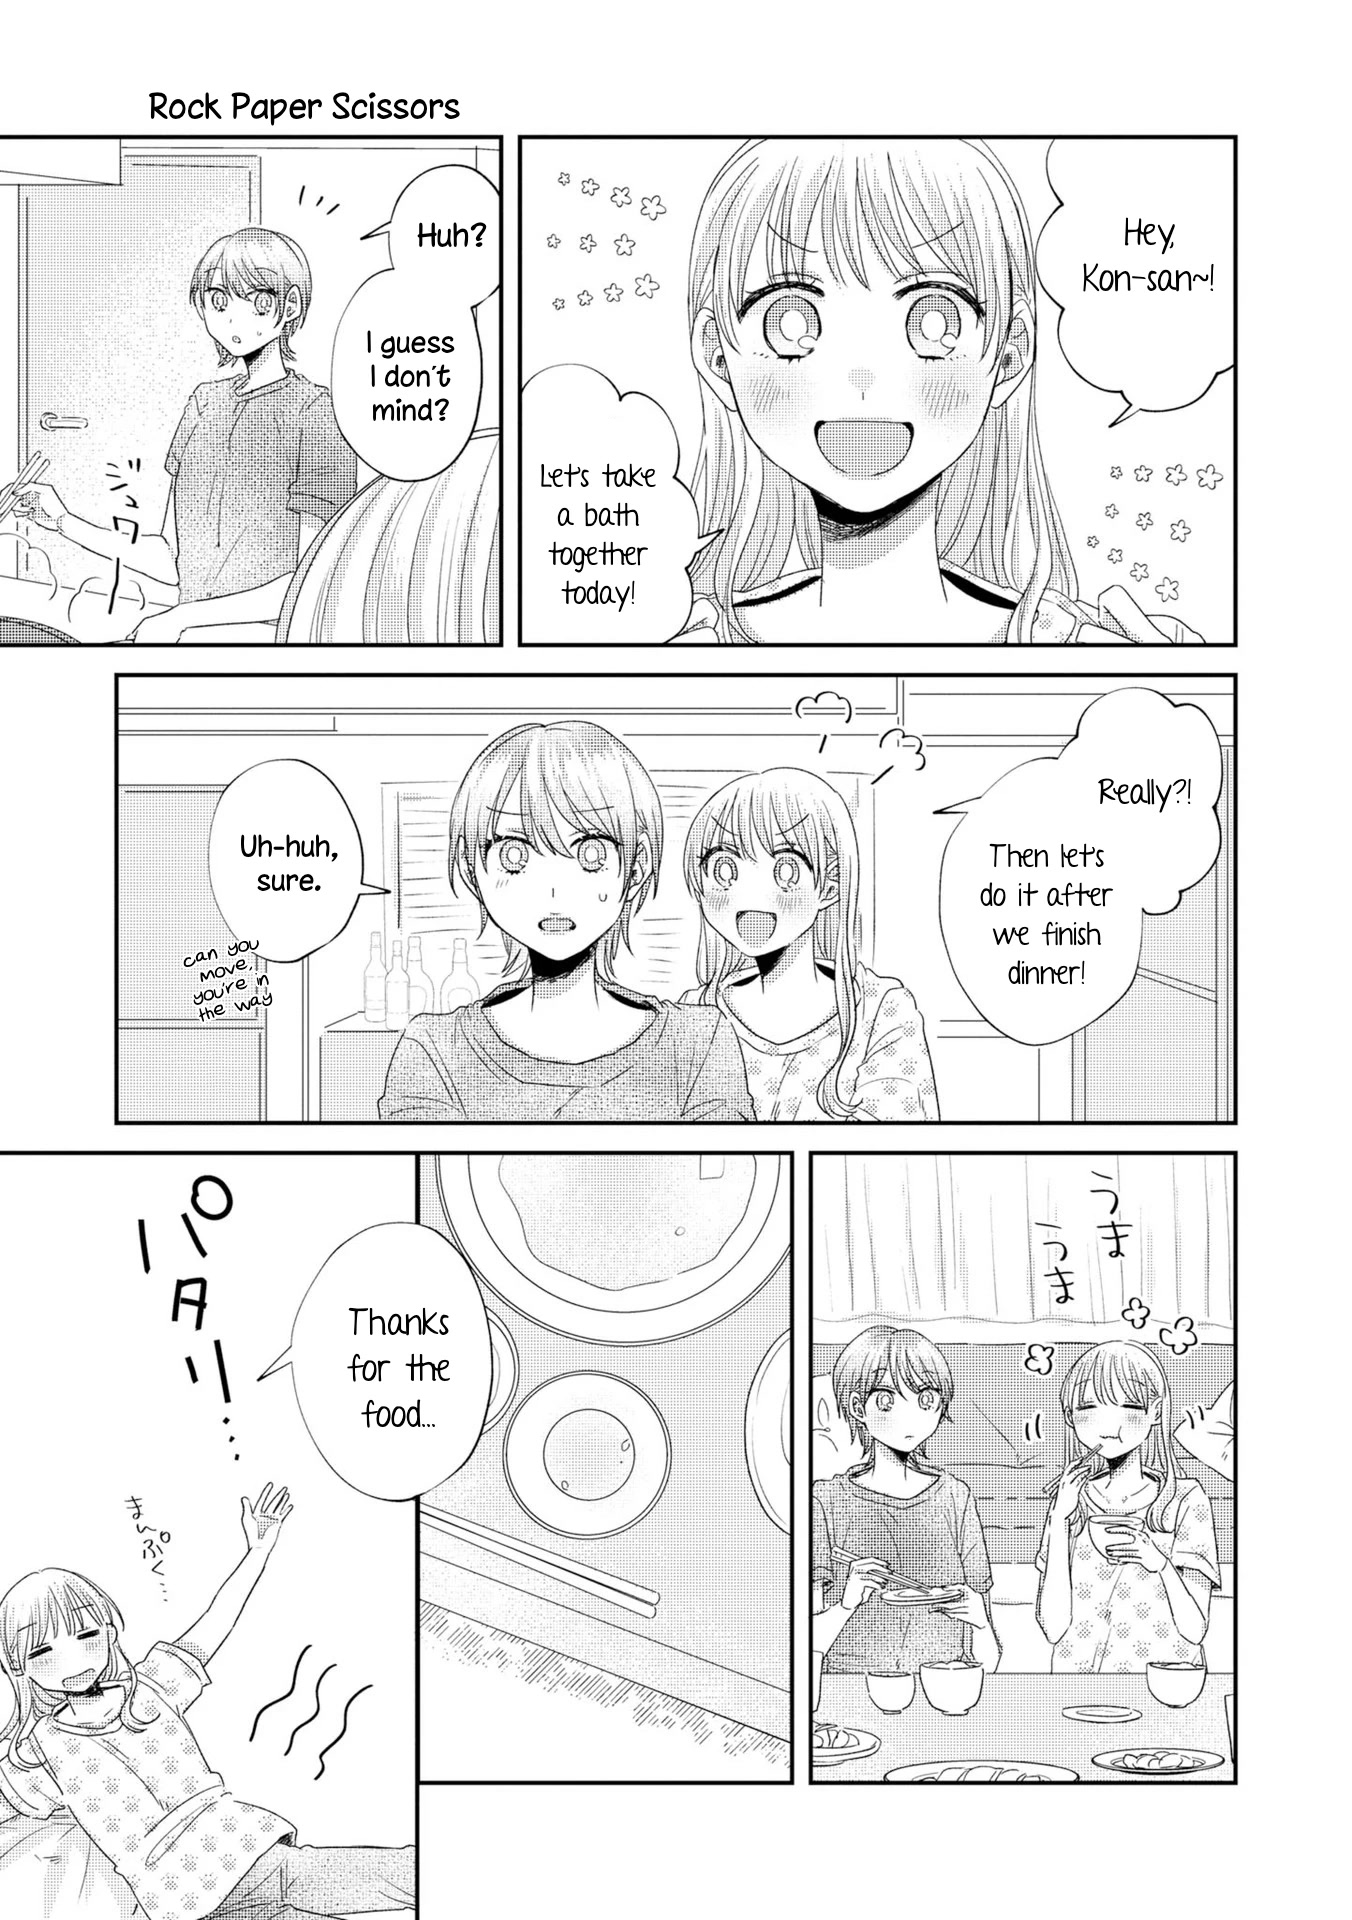 Today, We Continue Our Lives Together Under The Same Roof Chapter 31.5: Volume 2 Extras - Picture 2